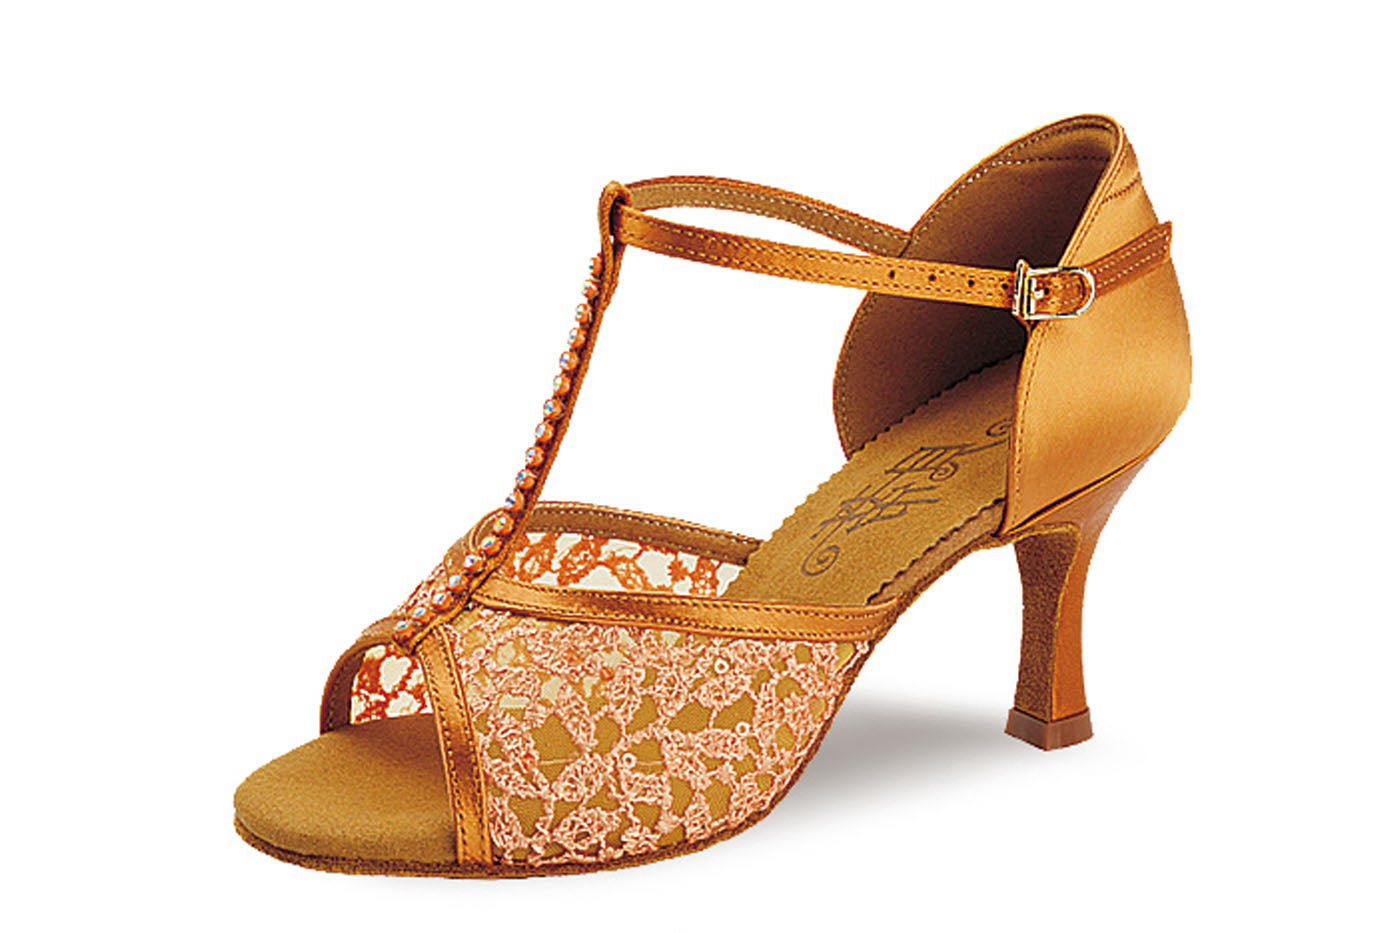 Ladies Latin dance shoe with lace